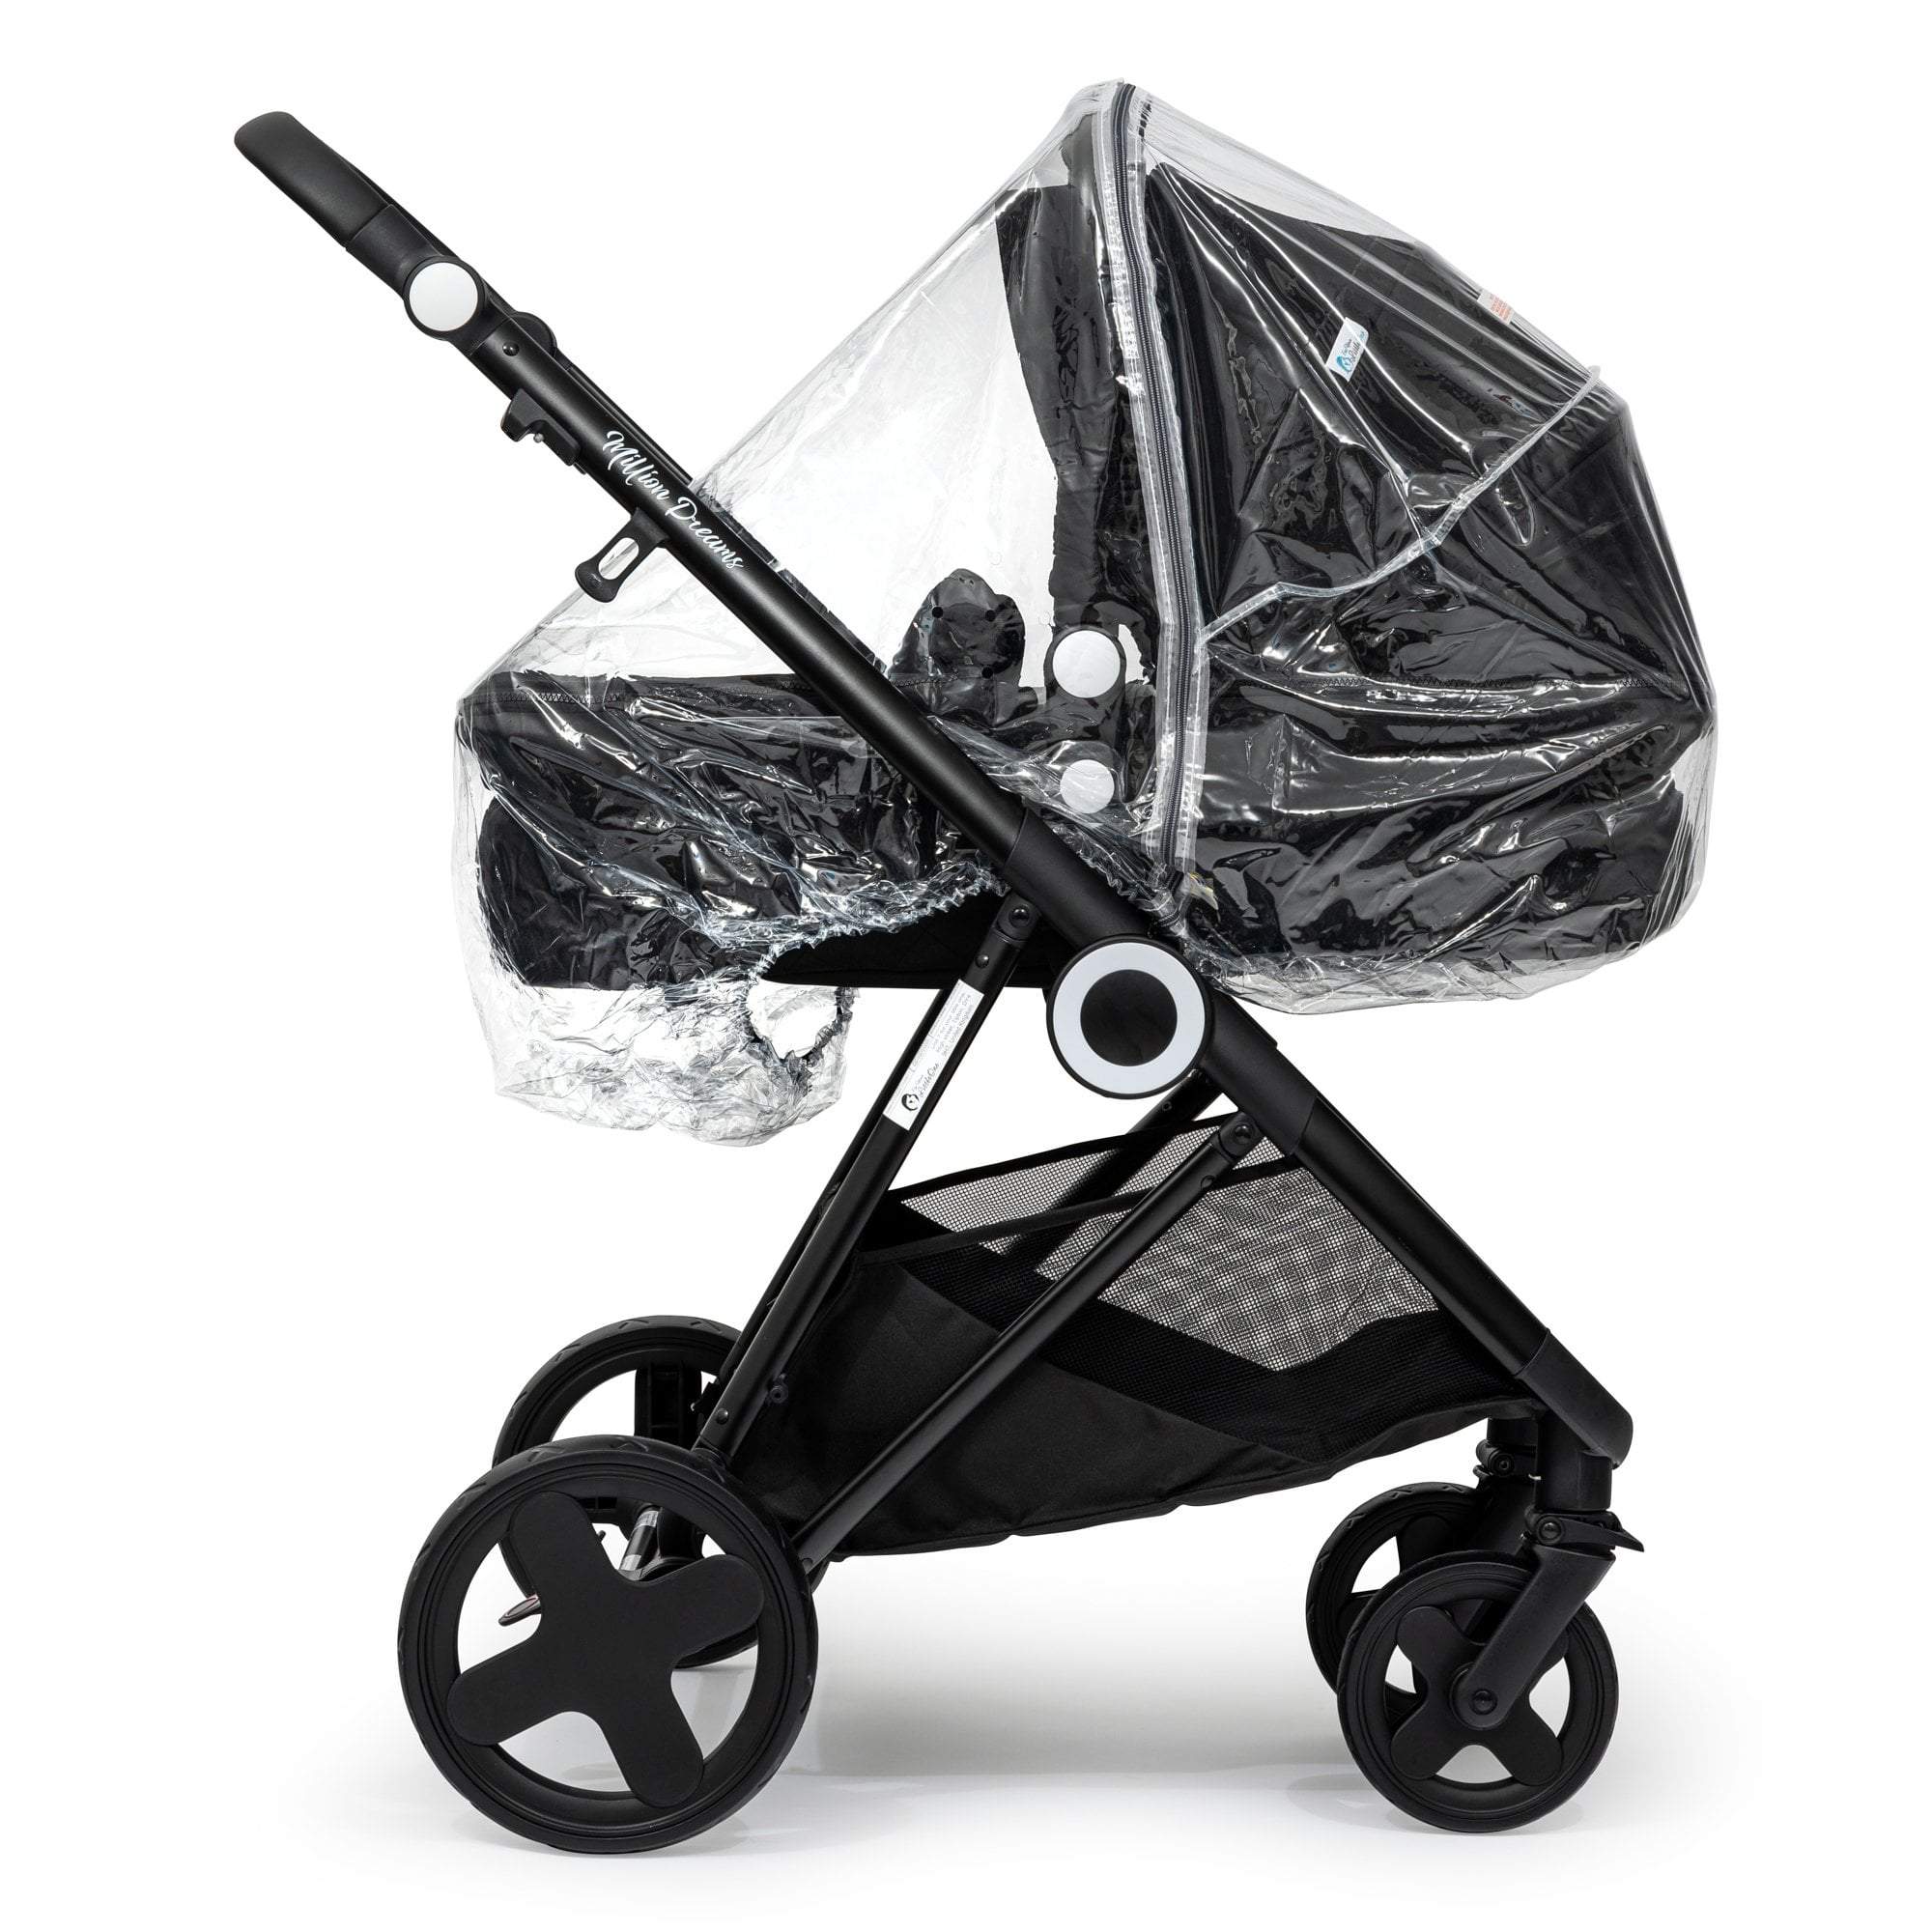 Carrycot Raincover Compatible With Emmaljunga - Fits All Models - For Your Little One